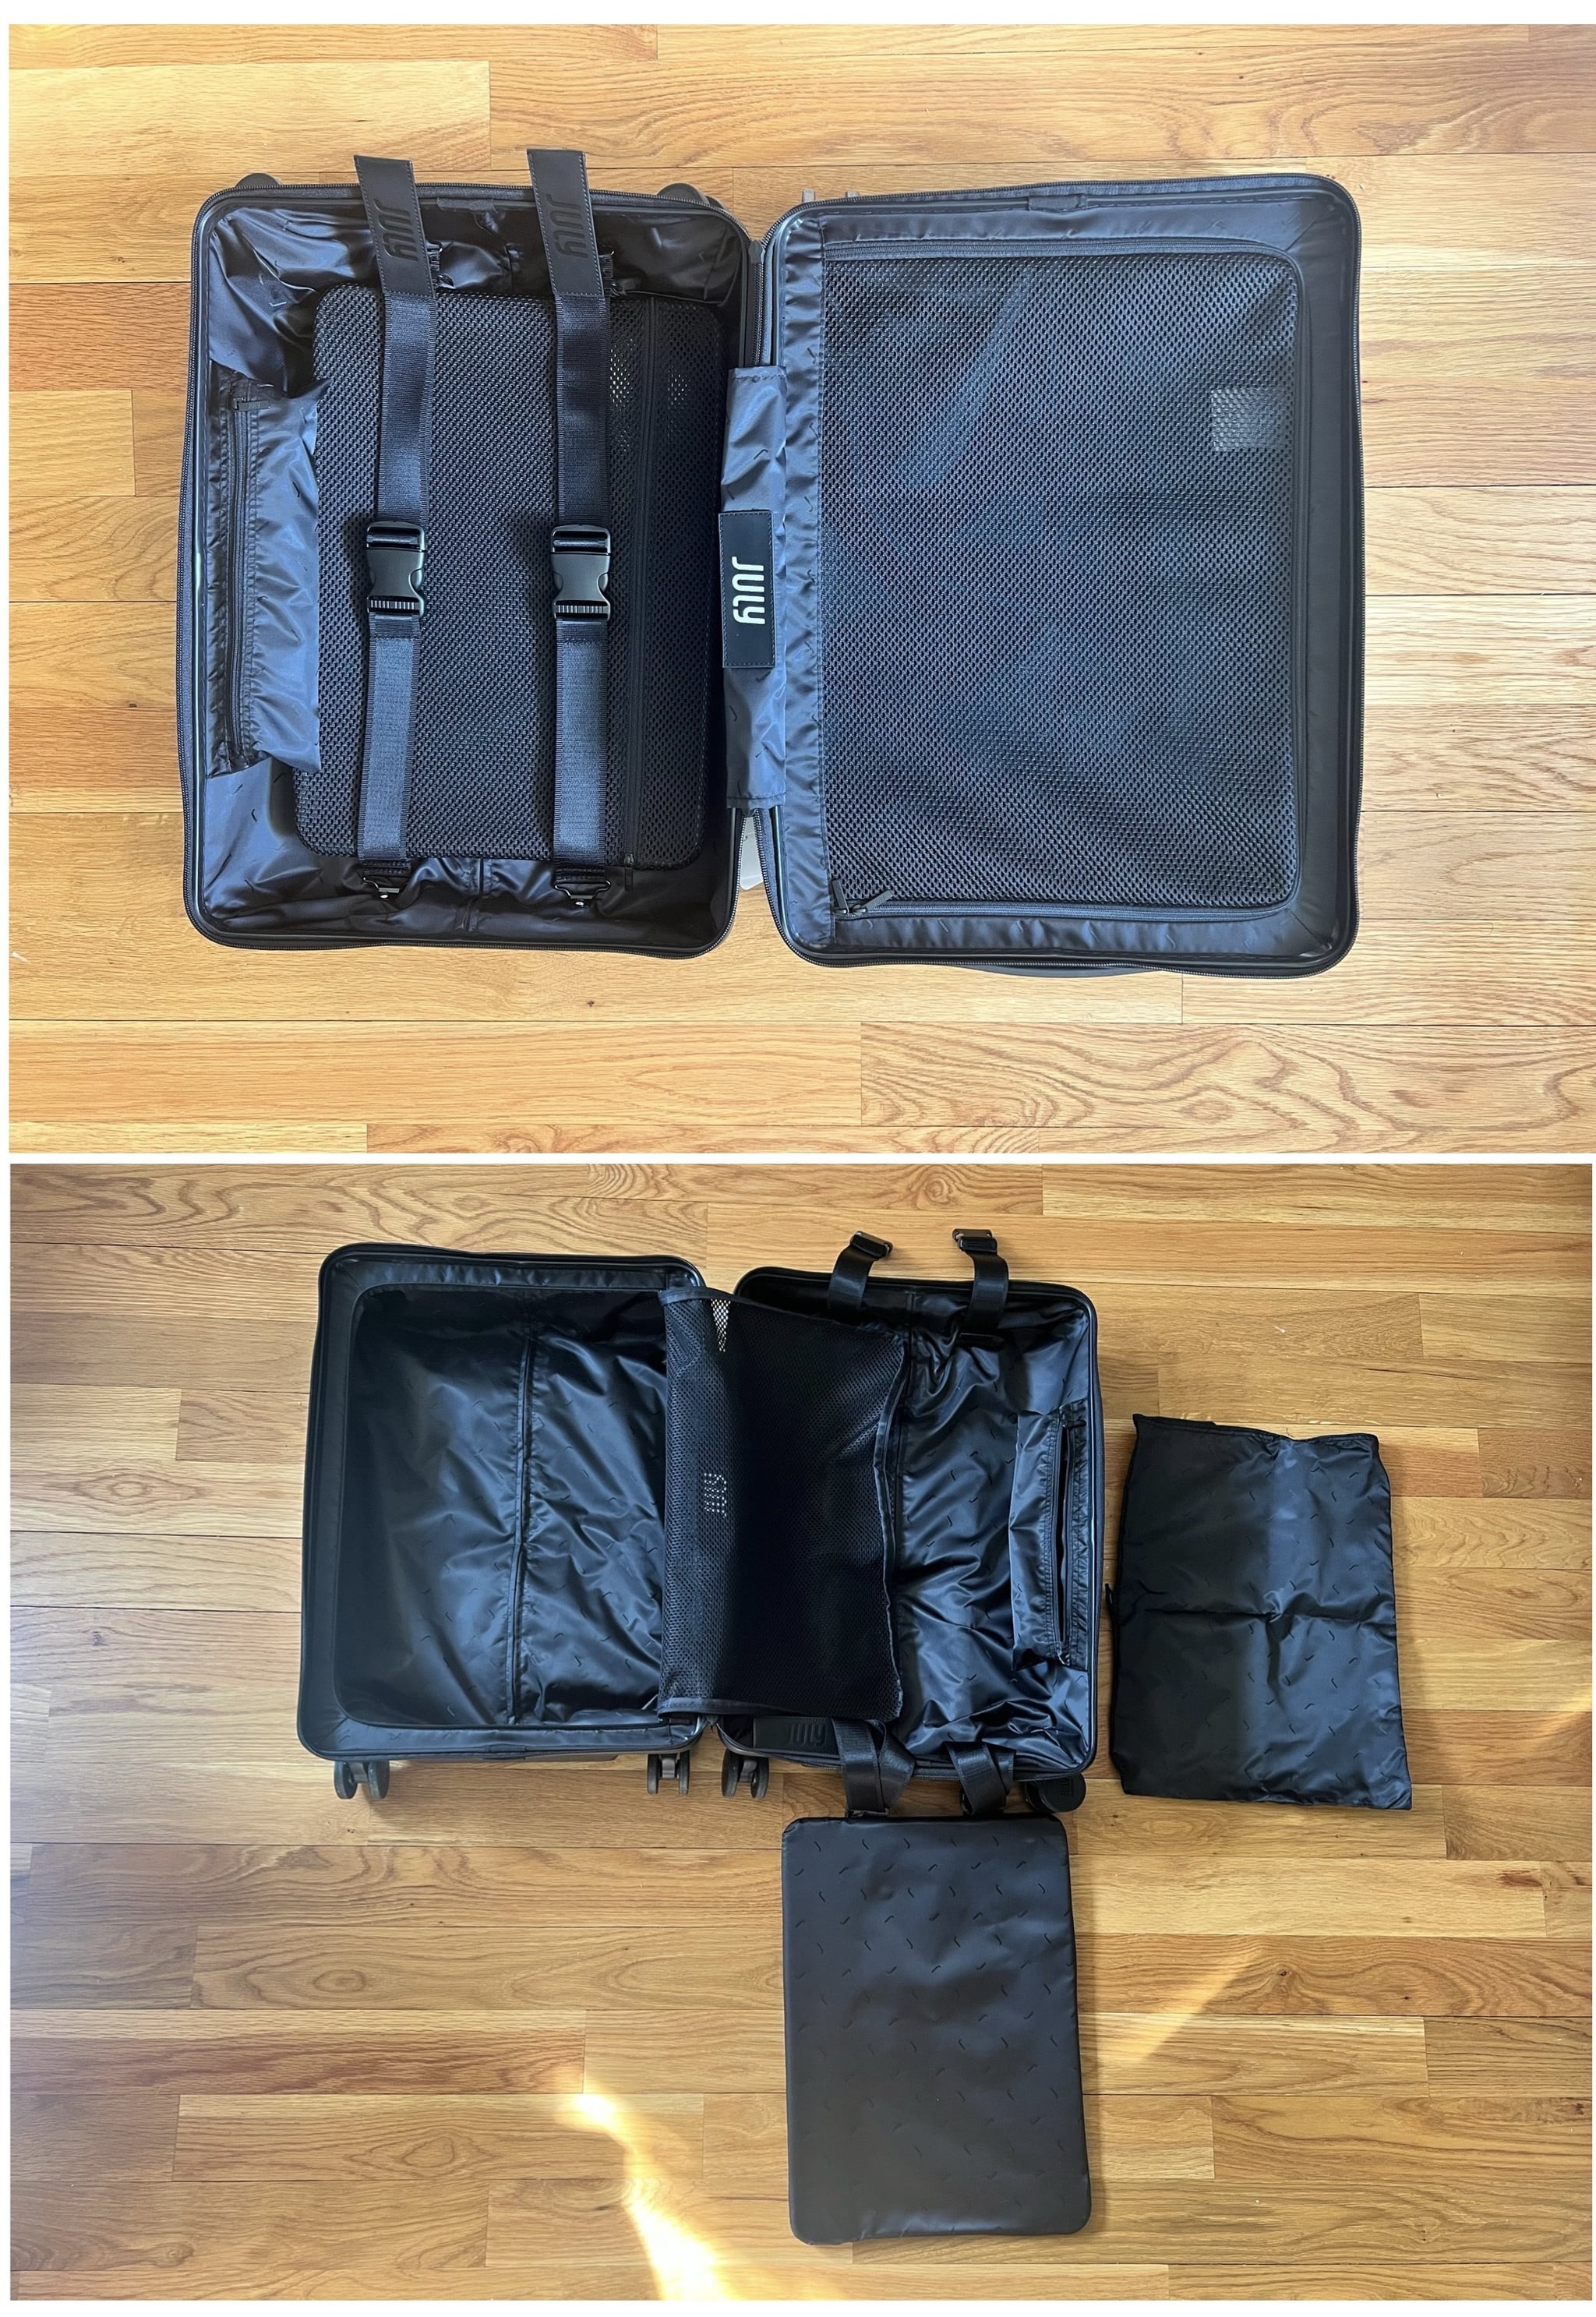 The July Carry-On Pro suitcase in charcoal empty.